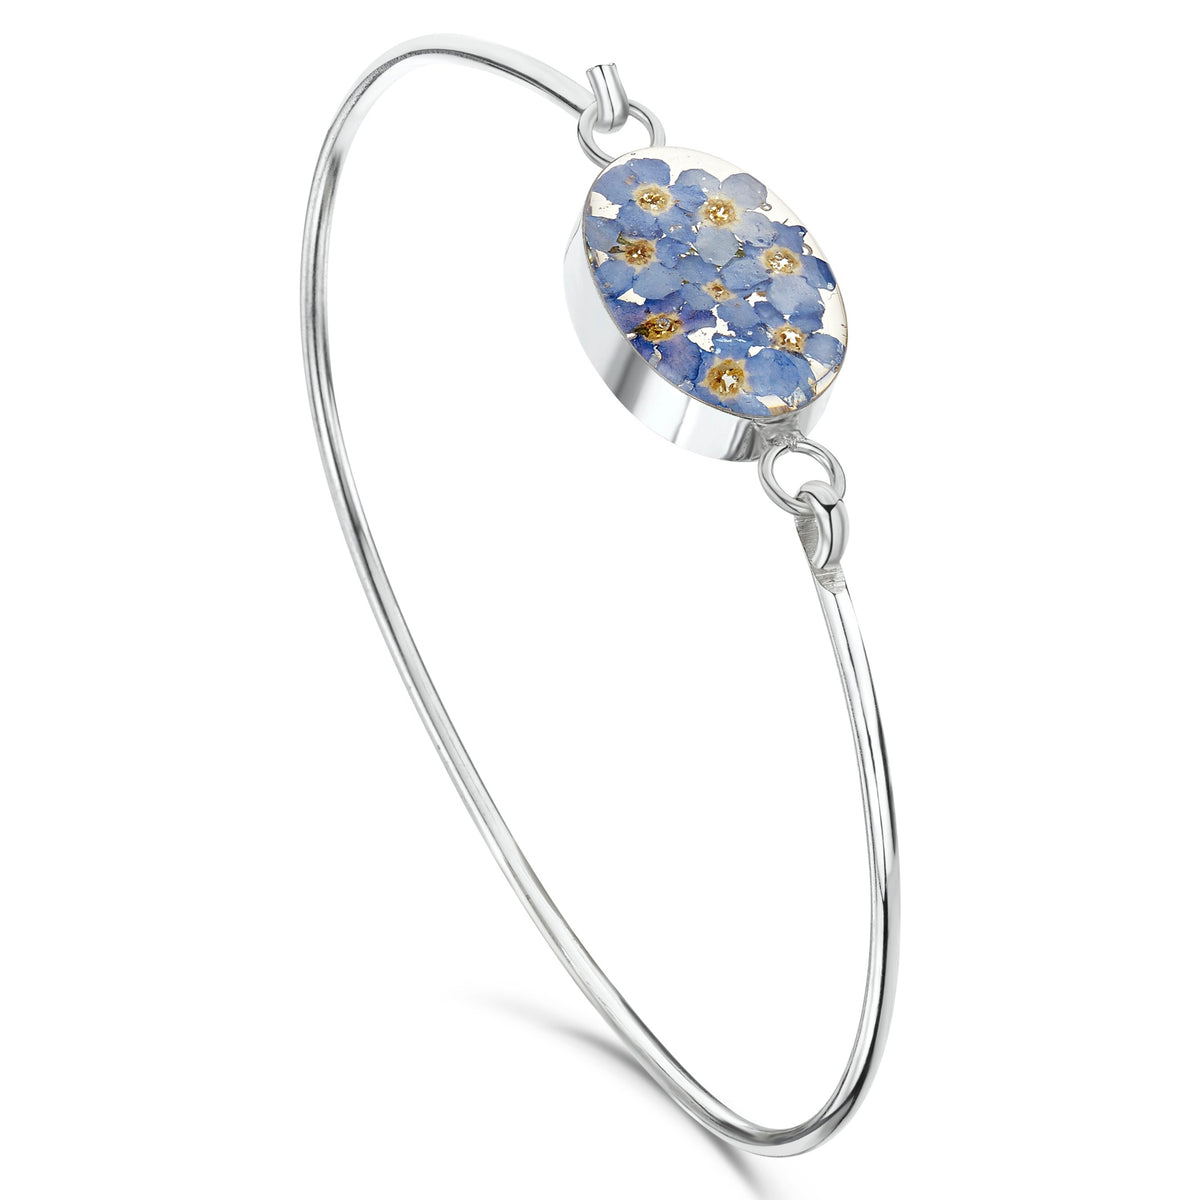 Sterling silver bangle with central sterling silver oval filled with real forget-me-not flowers set in resin.